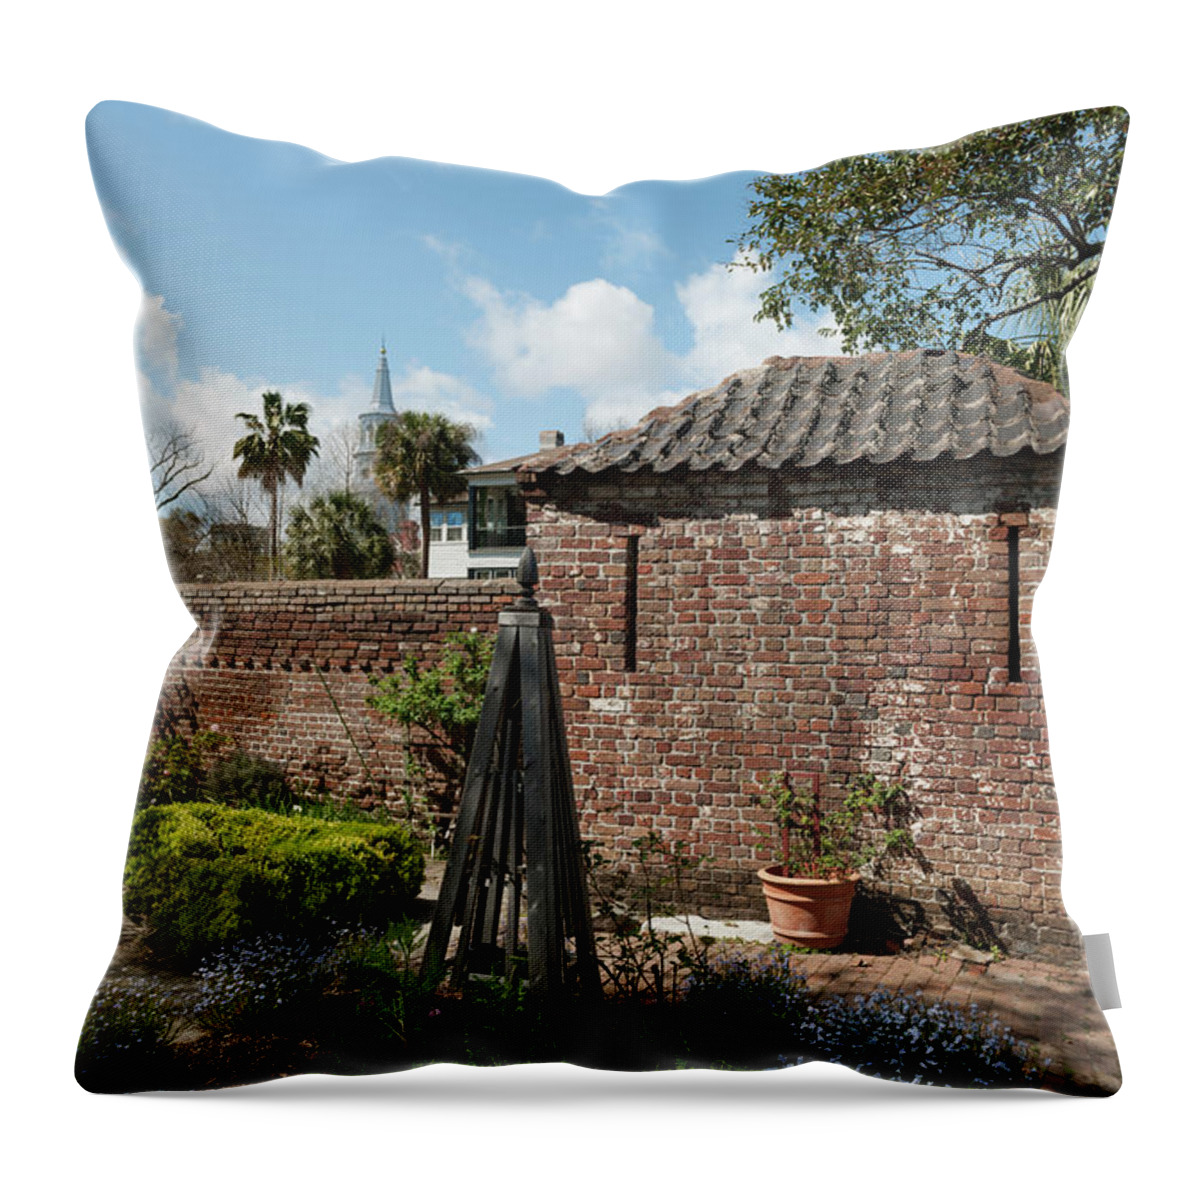 Heyward Washington House Throw Pillow featuring the photograph Declaration of Independence Signer Garden by Dale Powell